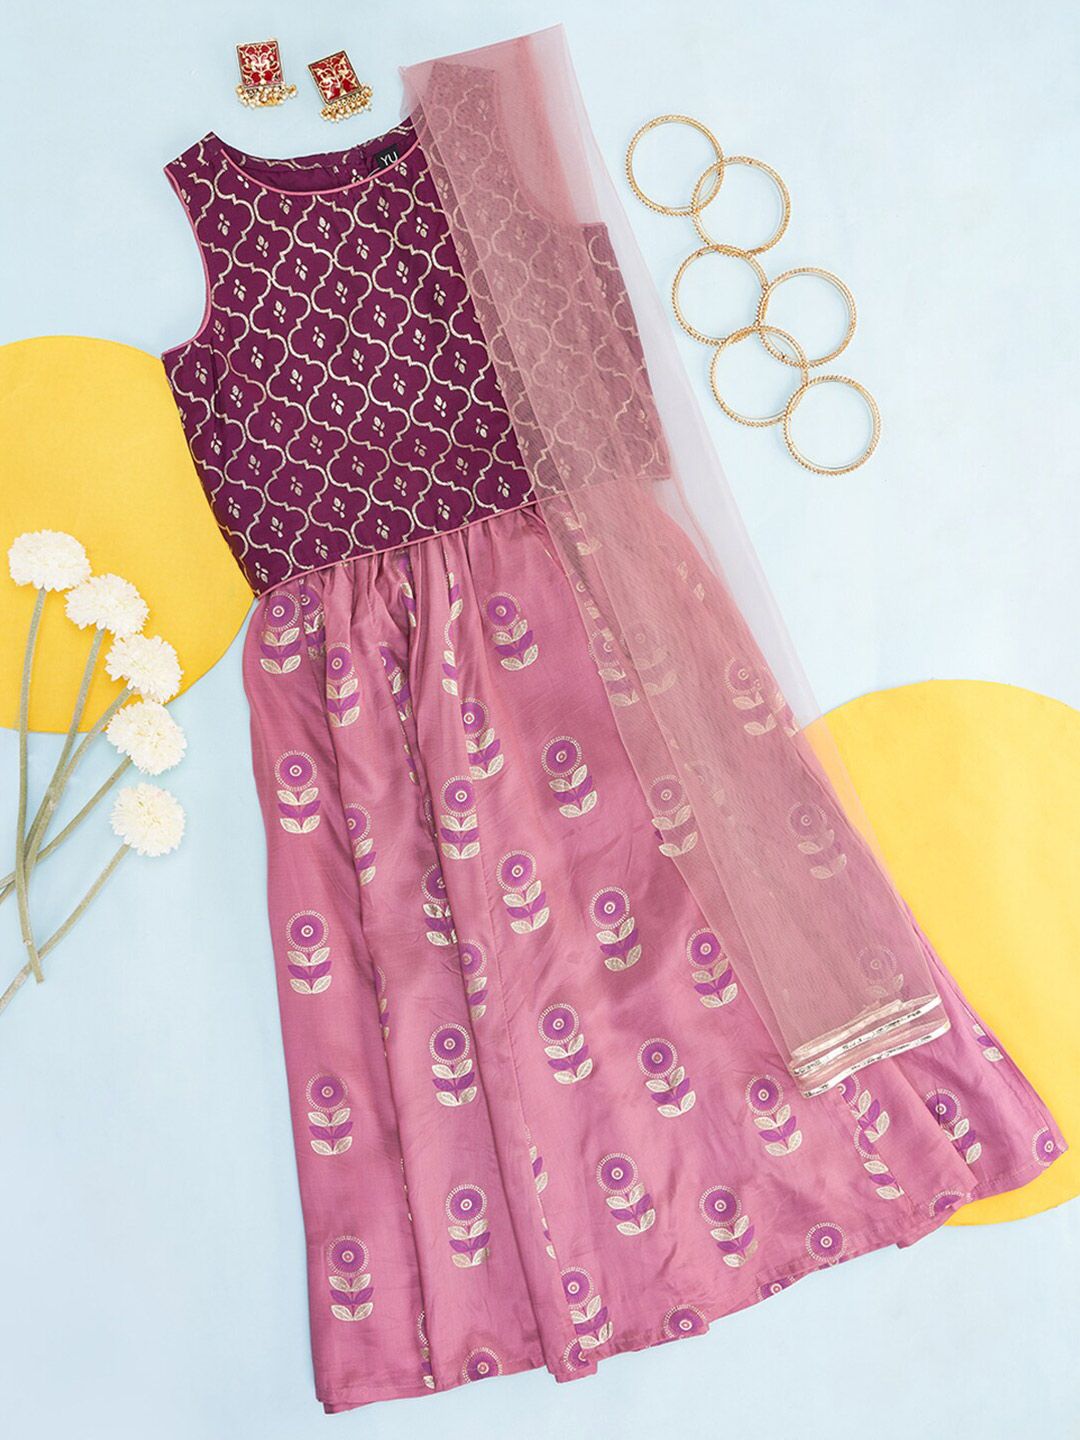 YU by Pantaloons Girls Pink & White Printed Ready to Wear Lehenga & Blouse With Dupatta Price in India